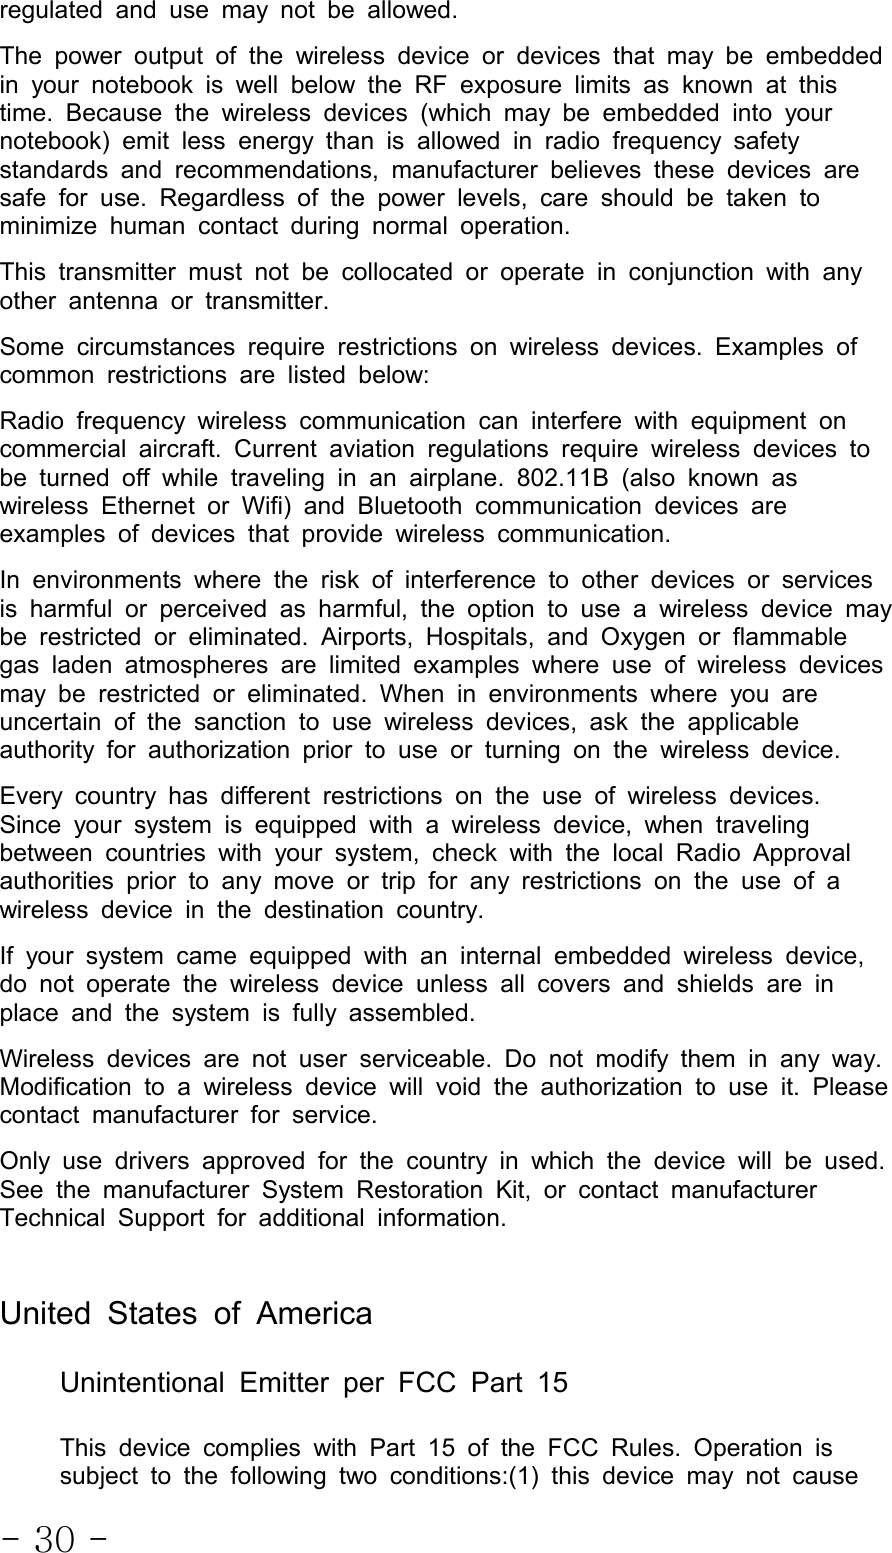 - 30 -regulated and use may not be allowed.The power output of the wireless device or devices that may be embeddedin your notebook is well below the RF exposure limits as known at thistime. Because the wireless devices (which may be embedded into yournotebook) emit less energy than is allowed in radio frequency safetystandards and recommendations, manufacturer believes these devices aresafe for use. Regardless of the power levels, care should be taken tominimize human contact during normal operation.This transmitter must not be collocatedoroperateinconjunctionwithanyother antenna or transmitter.Some circumstances require restrictions on wireless devices. Examples ofcommon restrictions are listed below:Radio frequency wireless communication can interfere with equipment oncommercial aircraft. Current aviation regulations require wireless devices tobe turned off while traveling in an airplane. 802.11B (also known aswireless Ethernet or Wifi) and Bluetooth communication devices areexamples of devices that provide wireless communication.In environments where the risk of interference to other devices or servicesis harmful or perceived as harmful, the option to use a wireless device maybe restricted or eliminated. Airports, Hospitals, and Oxygen or flammablegas laden atmospheres are limited examples where use of wireless devicesmay be restricted or eliminated. When in environments where you areuncertain of the sanction to use wireless devices, ask the applicableauthority for authorization prior to use or turning on the wireless device.Every country has different restrictions on the use of wireless devices.Since your system is equipped with a wireless device, when travelingbetween countries with your system, check with the local Radio Approvalauthorities prior to any move or trip for any restrictions on the use of awireless device in the destination country.If your system came equipped with an internal embedded wireless device,do not operate the wireless device unless all covers and shields are inplace and the system is fully assembled.Wireless devices are not user serviceable. Do not modify them in any way.Modification to a wireless device will void the authorization to use it. Pleasecontact manufacturer for service.Only use drivers approved for the country in which the device will be used.See the manufacturer System Restoration Kit, or contact manufacturerTechnical Support for additional information.United States of AmericaUnintentional Emitter per FCC Part 15This device complies with Part 15 of the FCC Rules. Operation issubject to the following two conditions:(1) this device may not cause